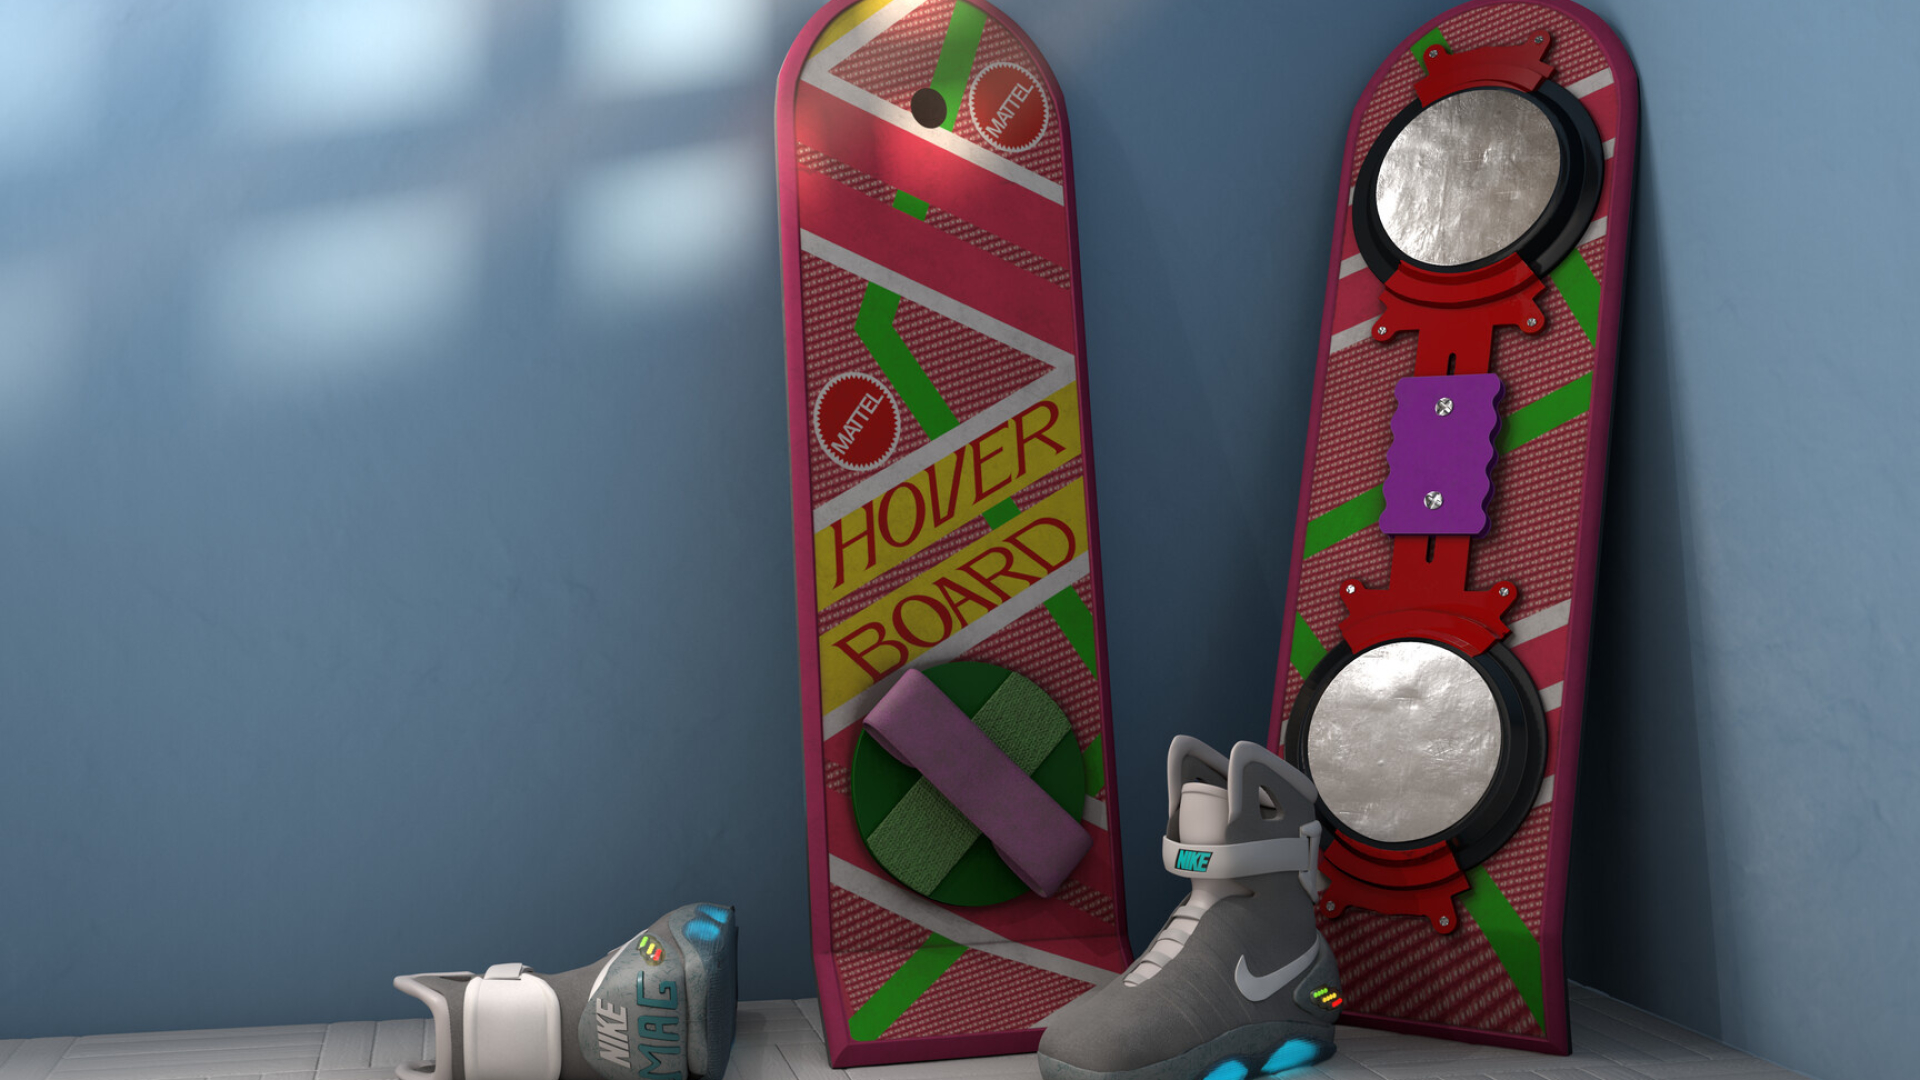 Hoverboard and shoes, Hoverboard Wallpaper, 1920x1080 Full HD Desktop